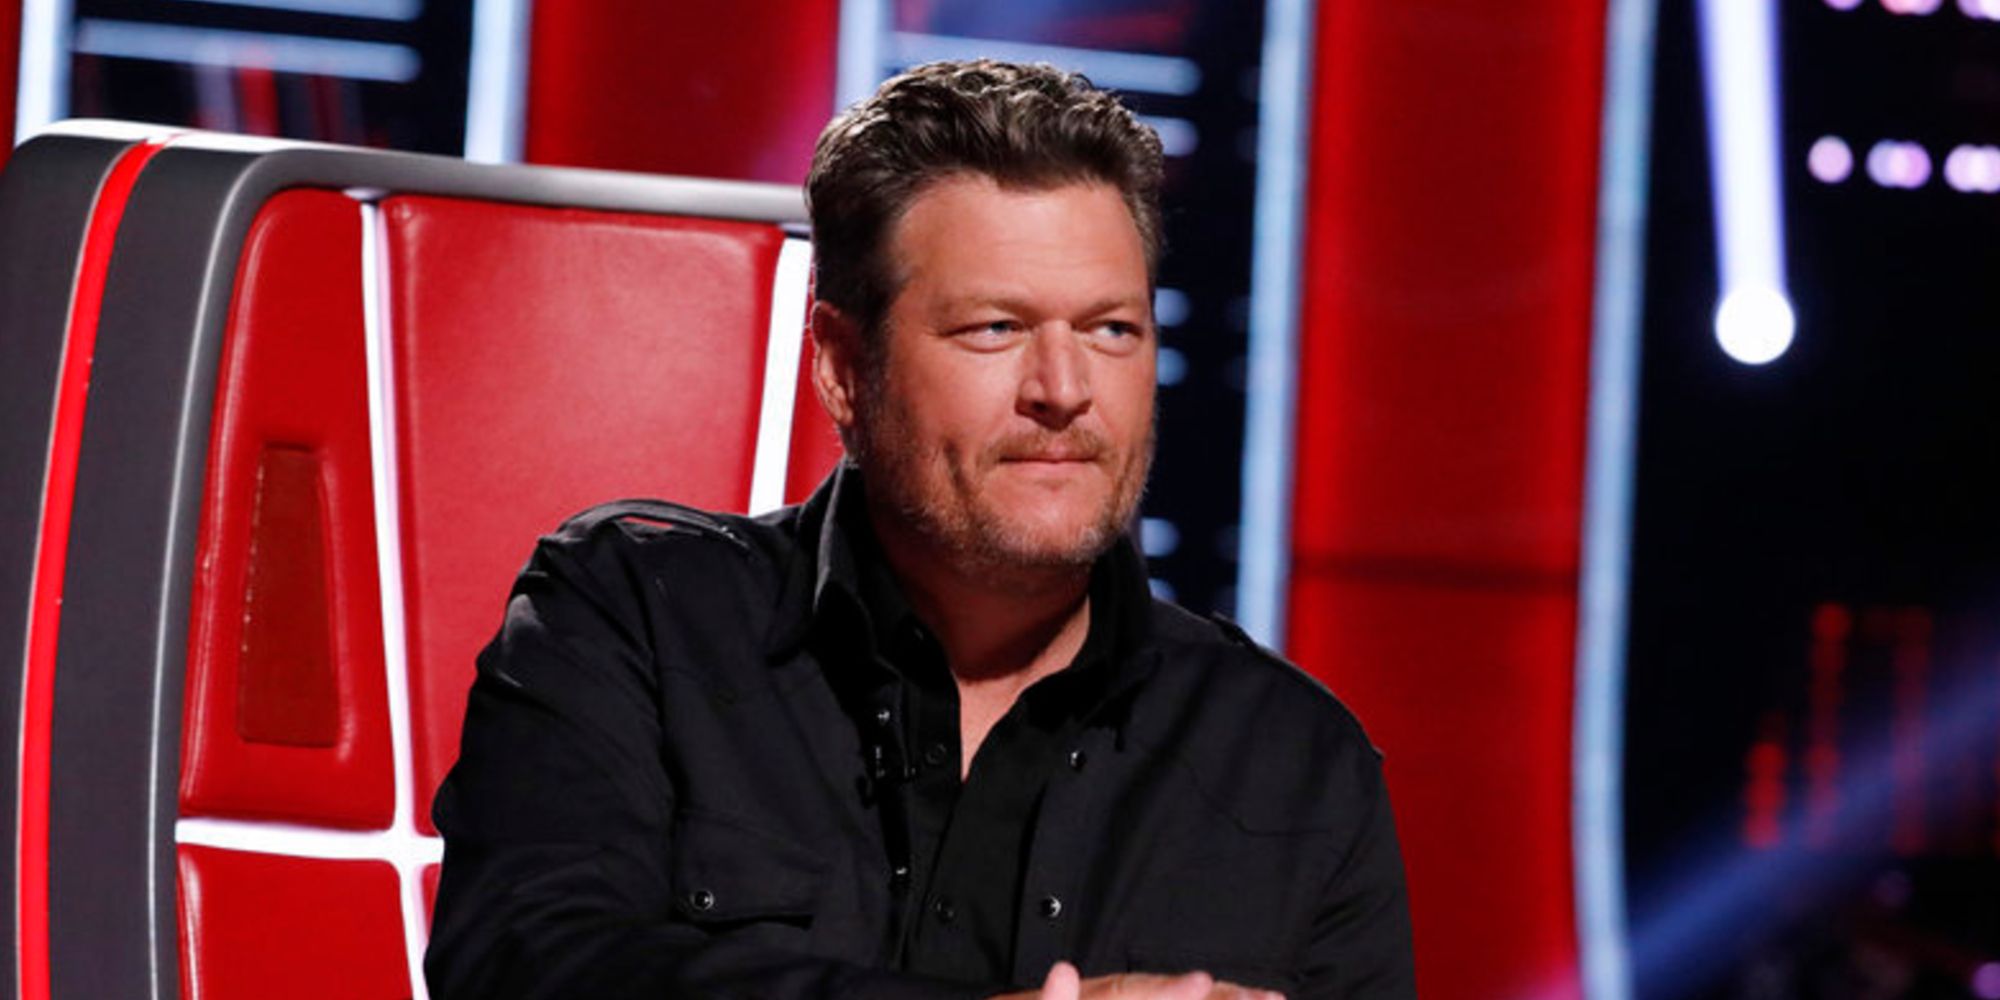 10 Things You Never Knew About The Voice